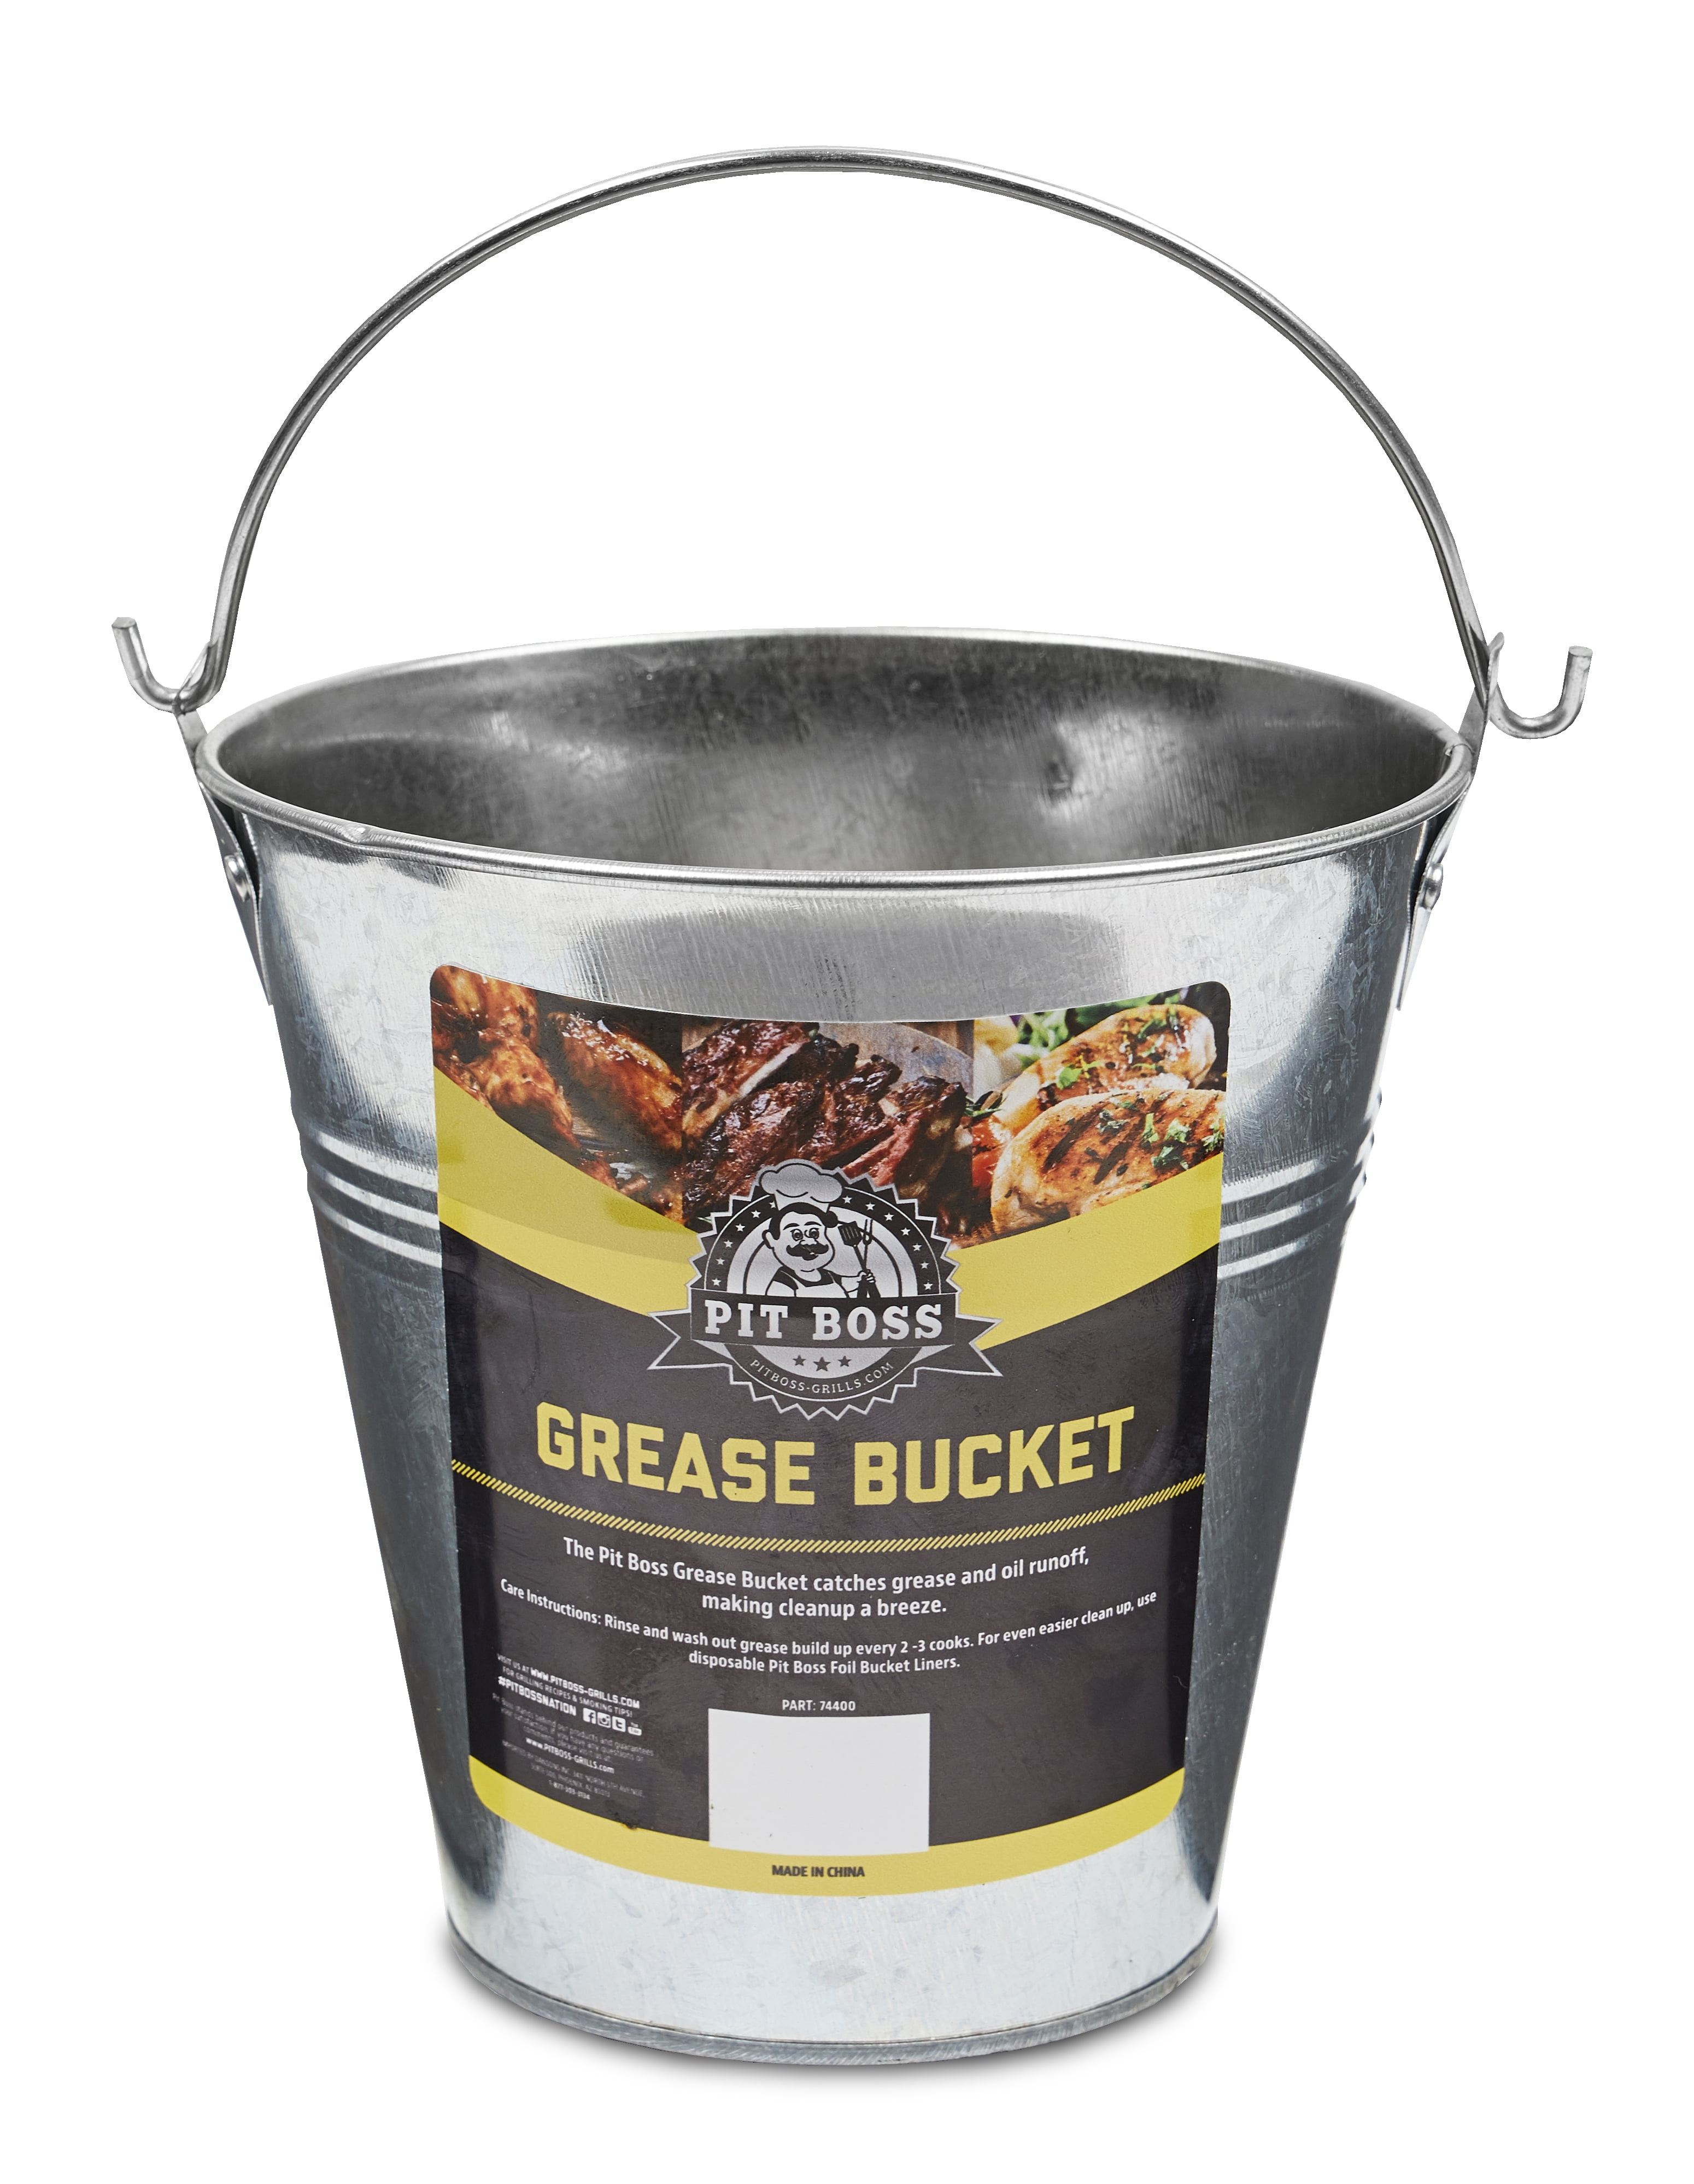 QuliMetal Wood Pellet Grill Grease Bucket Replaces HDW152 for Traeger & Pit Boss 